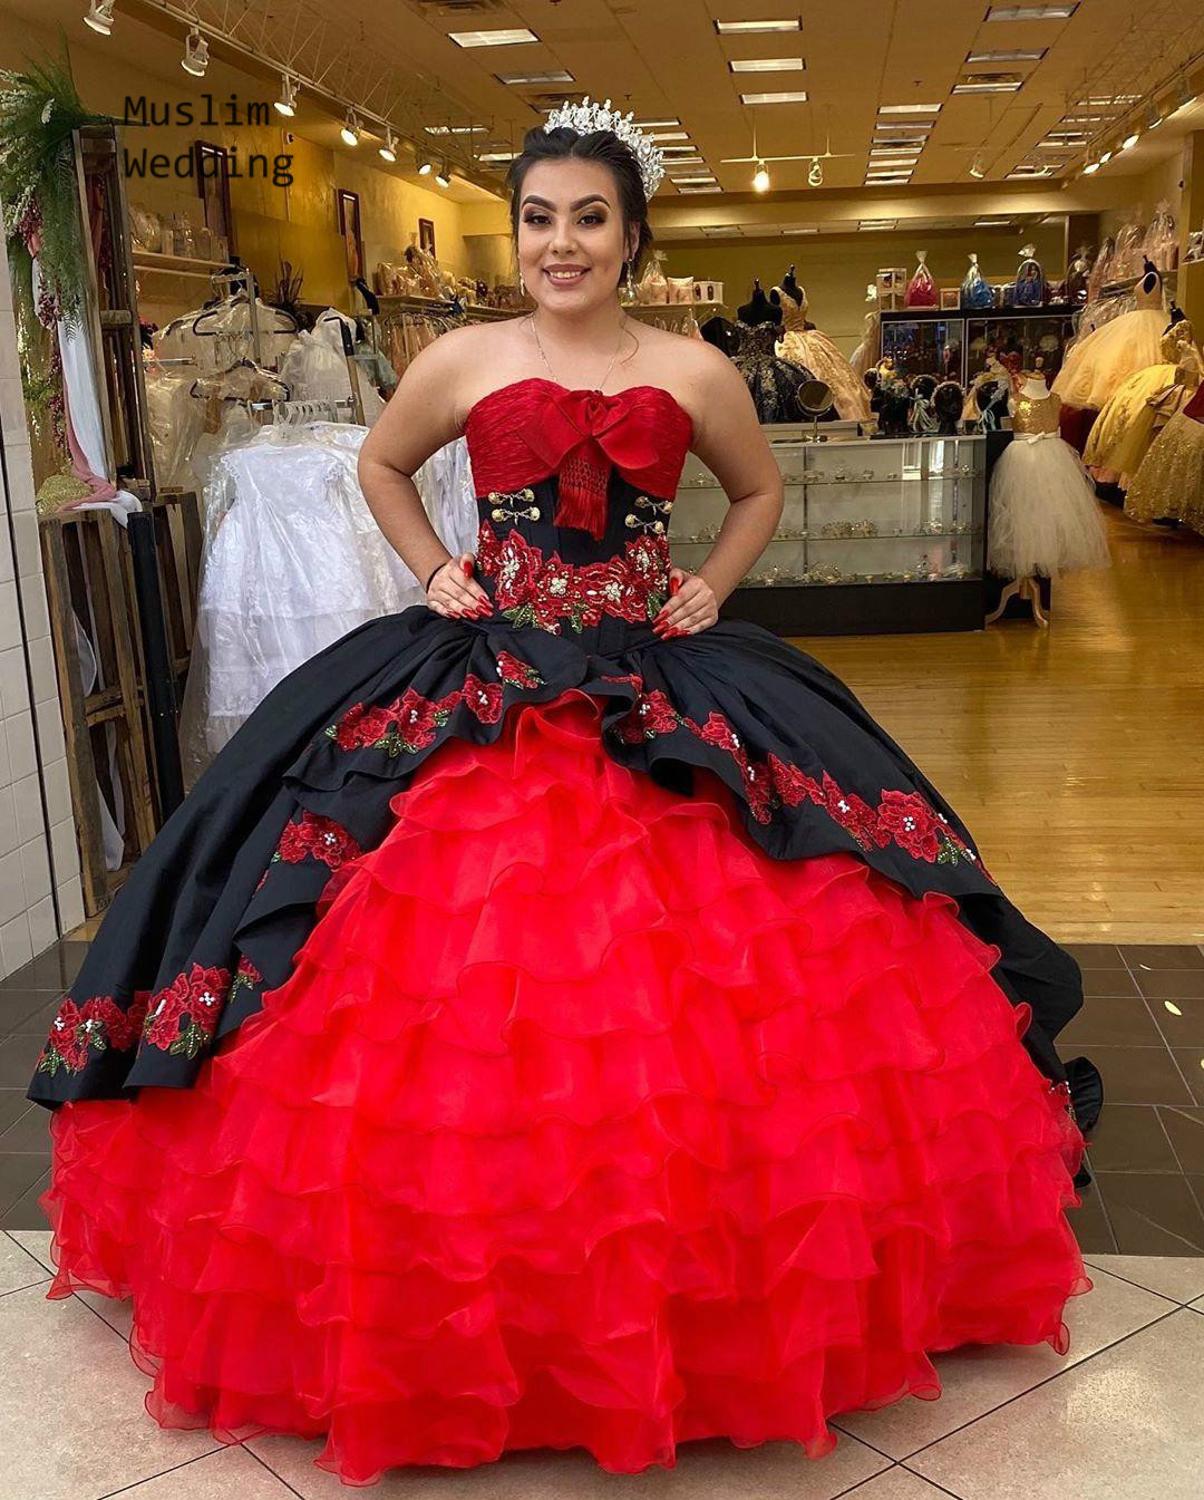 ready to ship quinceanera dresses,quinceanera dress great gatsby 2 piece big puffy,unique quinceanera dress puffy,charro quinceanera dress for sale,mexican quinceanera charro dress,floral embroidery quinceanera dress,embroidery sweet 16 dress,black and red quinceanera dress,custom design quinceanera dress,quinceanera designers for dress,designer quinceanera dress,